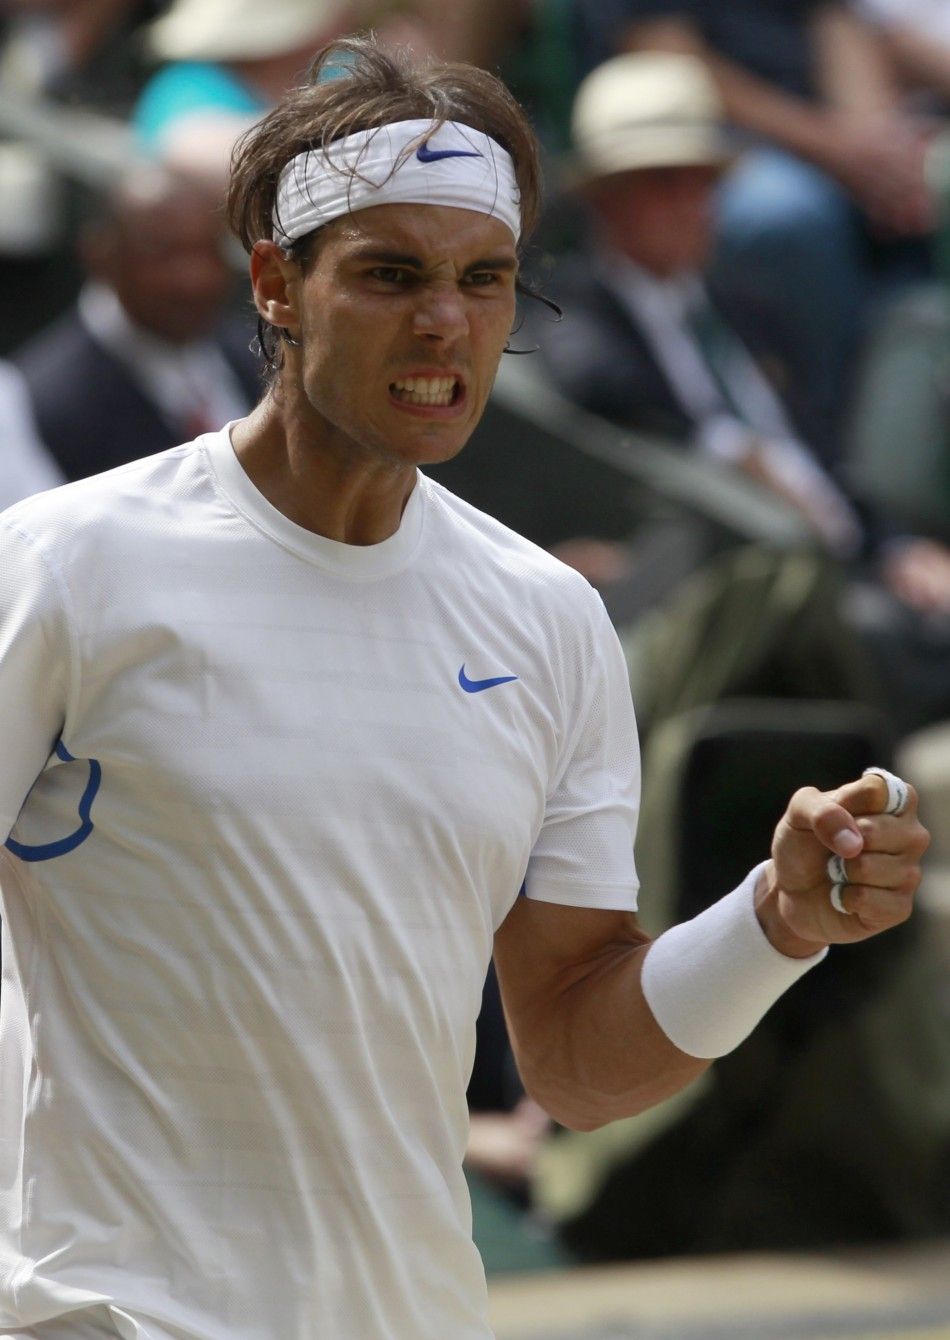 Rafael Nadal of Spain reacts during his men039s singles final match against Novak Djokovic of Serbia at the Wimbledon tennis championships in London